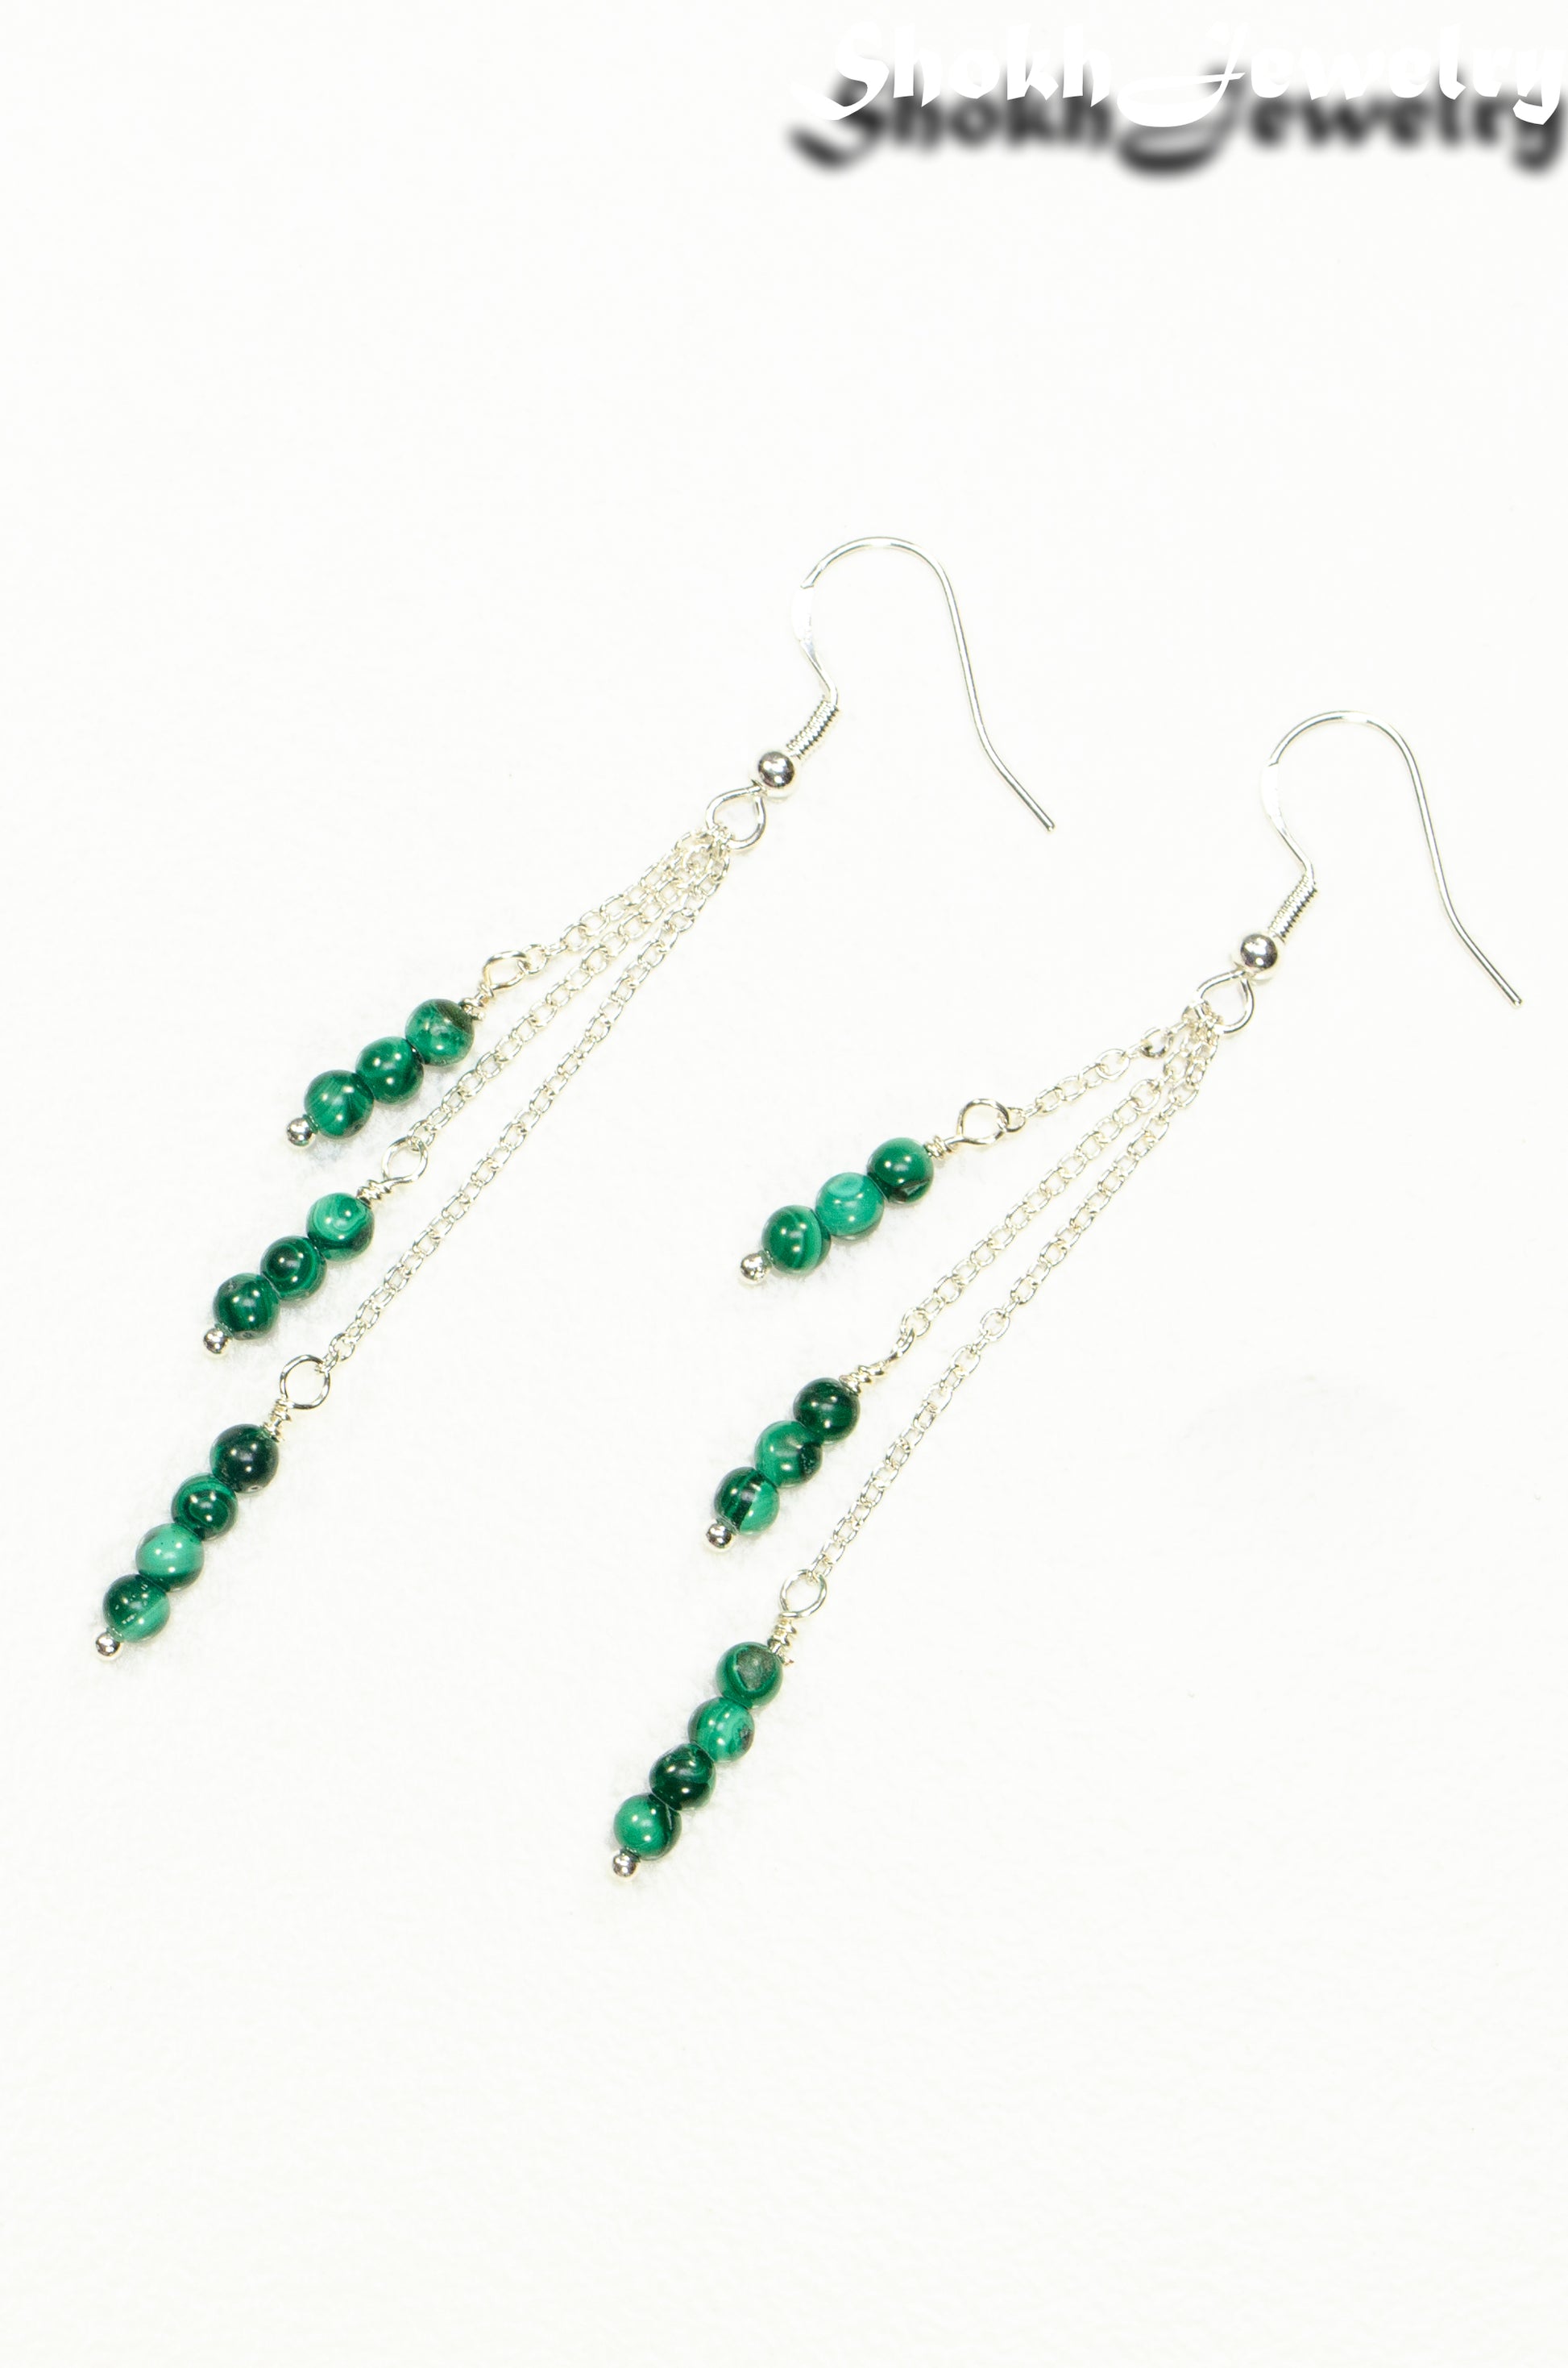 Top view of Silver Plated Chain and Malachite Stone Earrings.